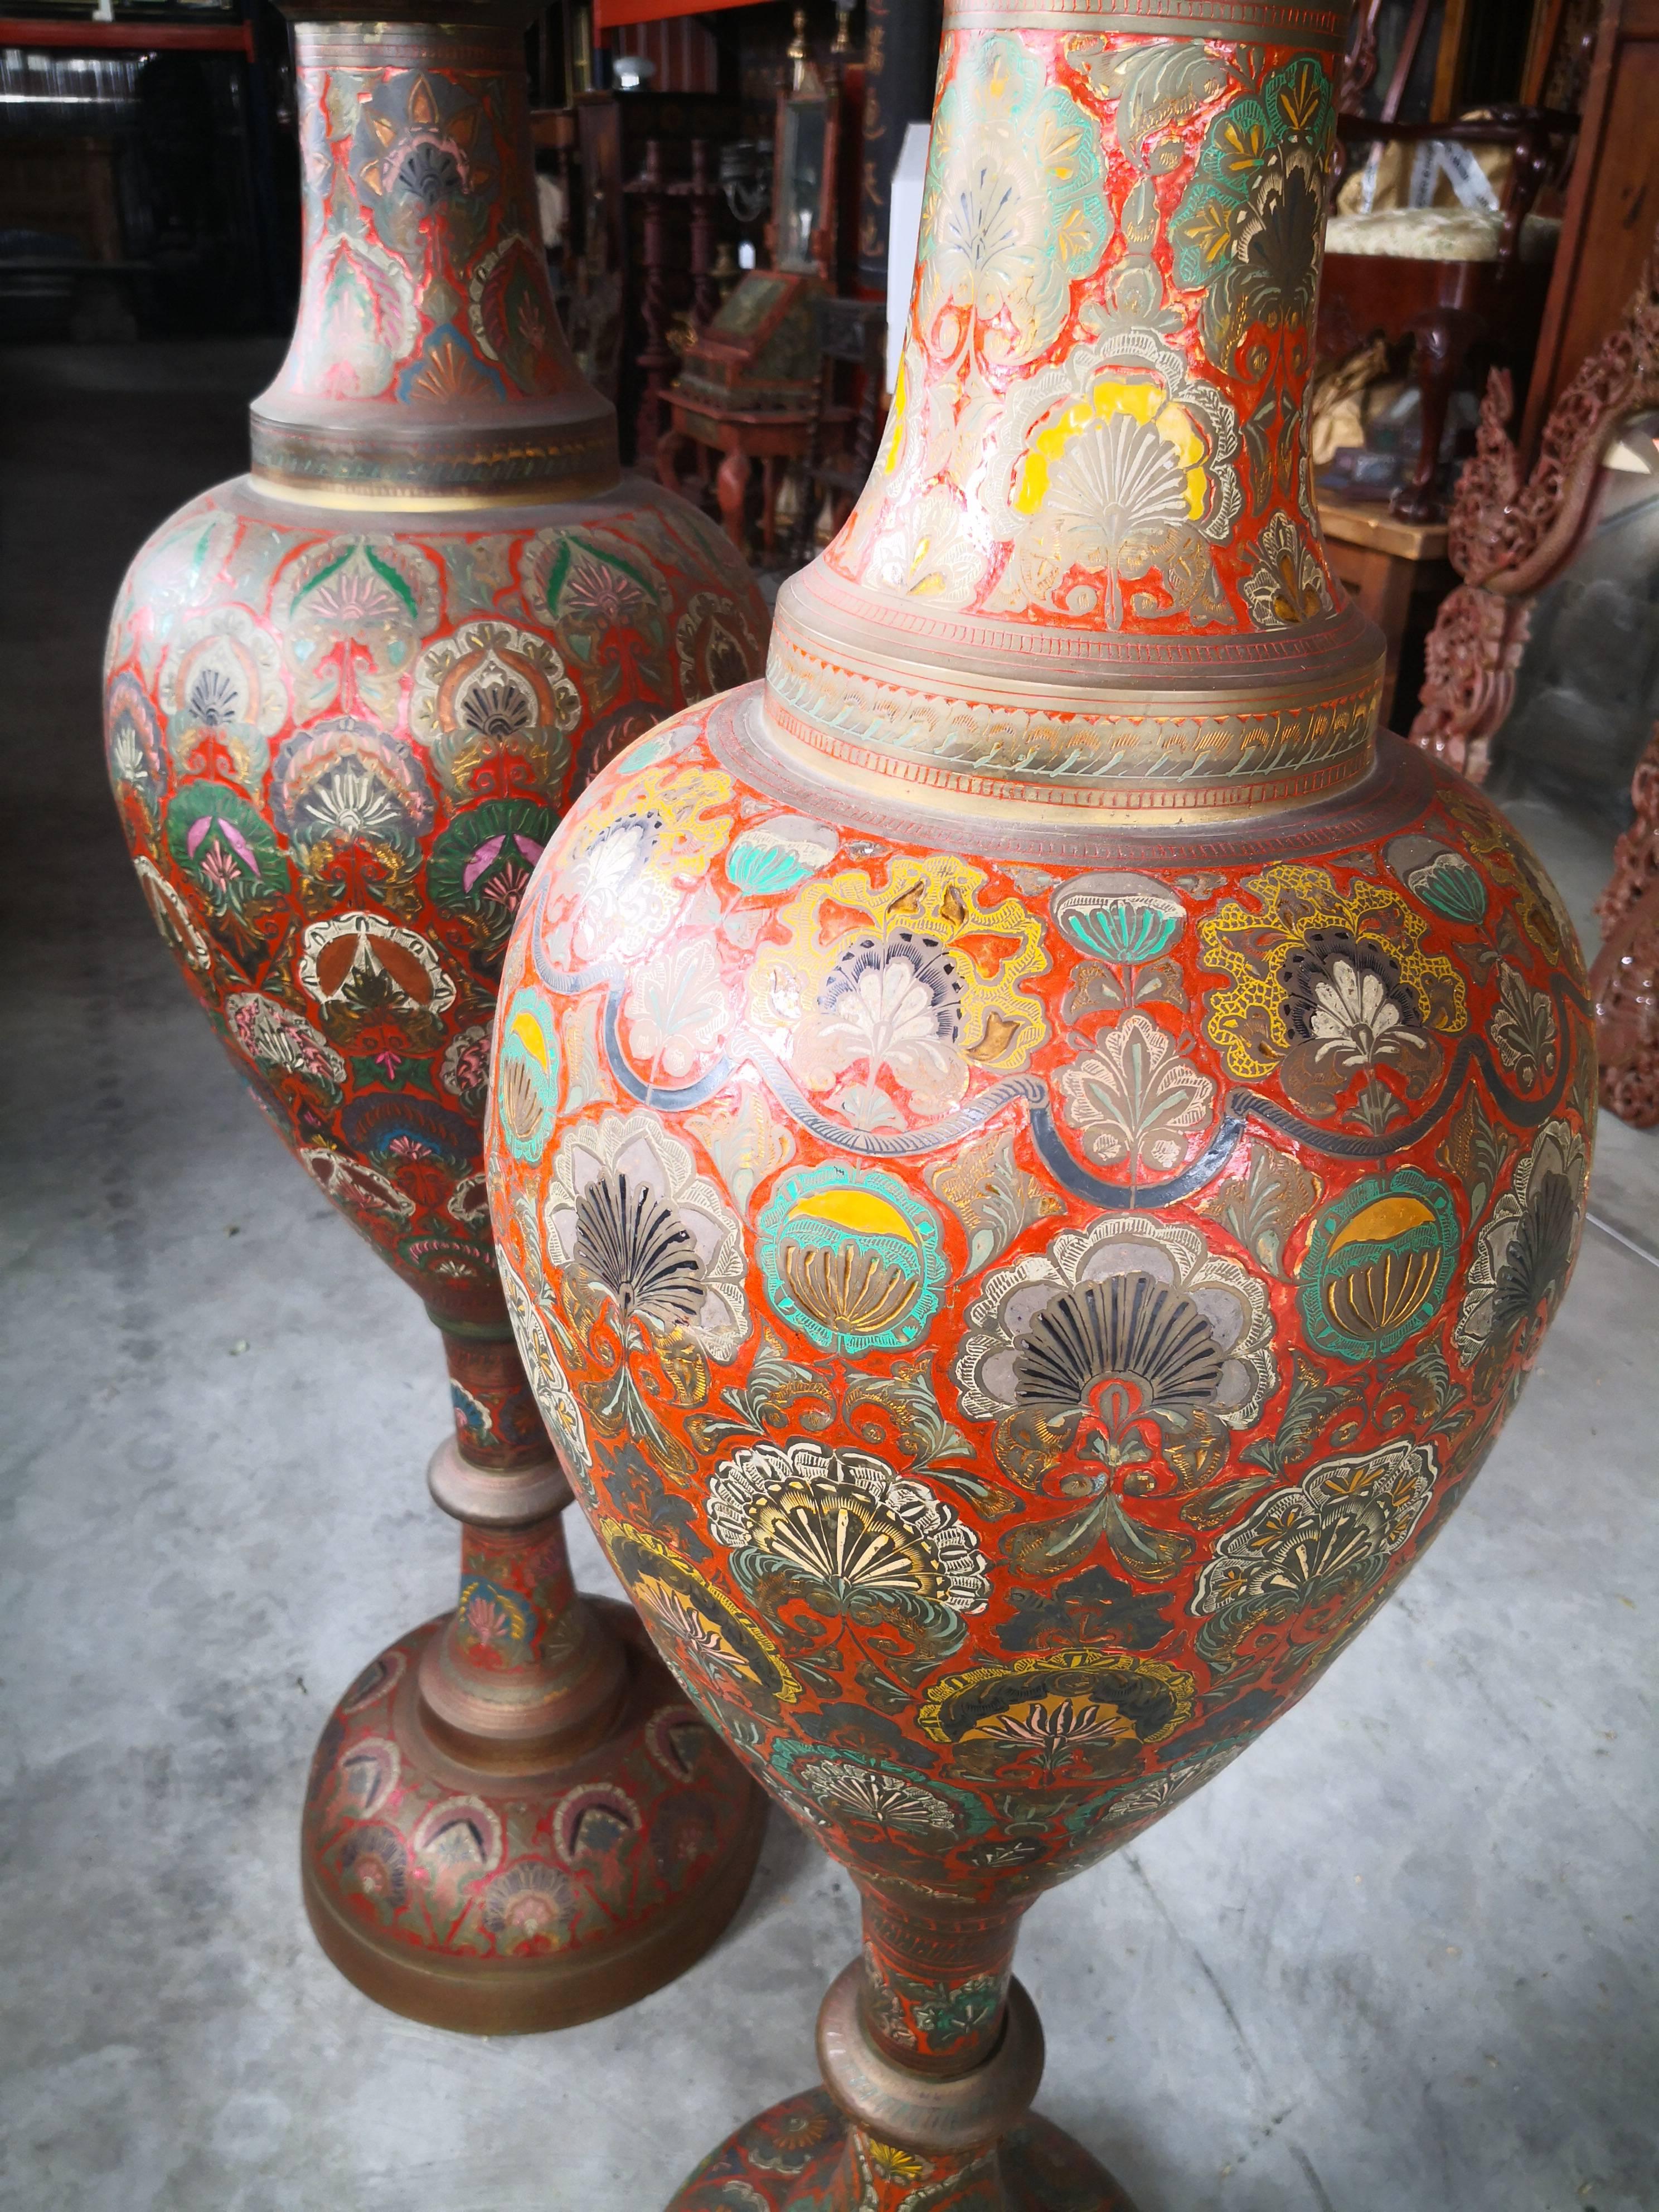 1940s pair of bronze polychrome enameled vases in Arabic style, using ornamental geometric and floral patterns.